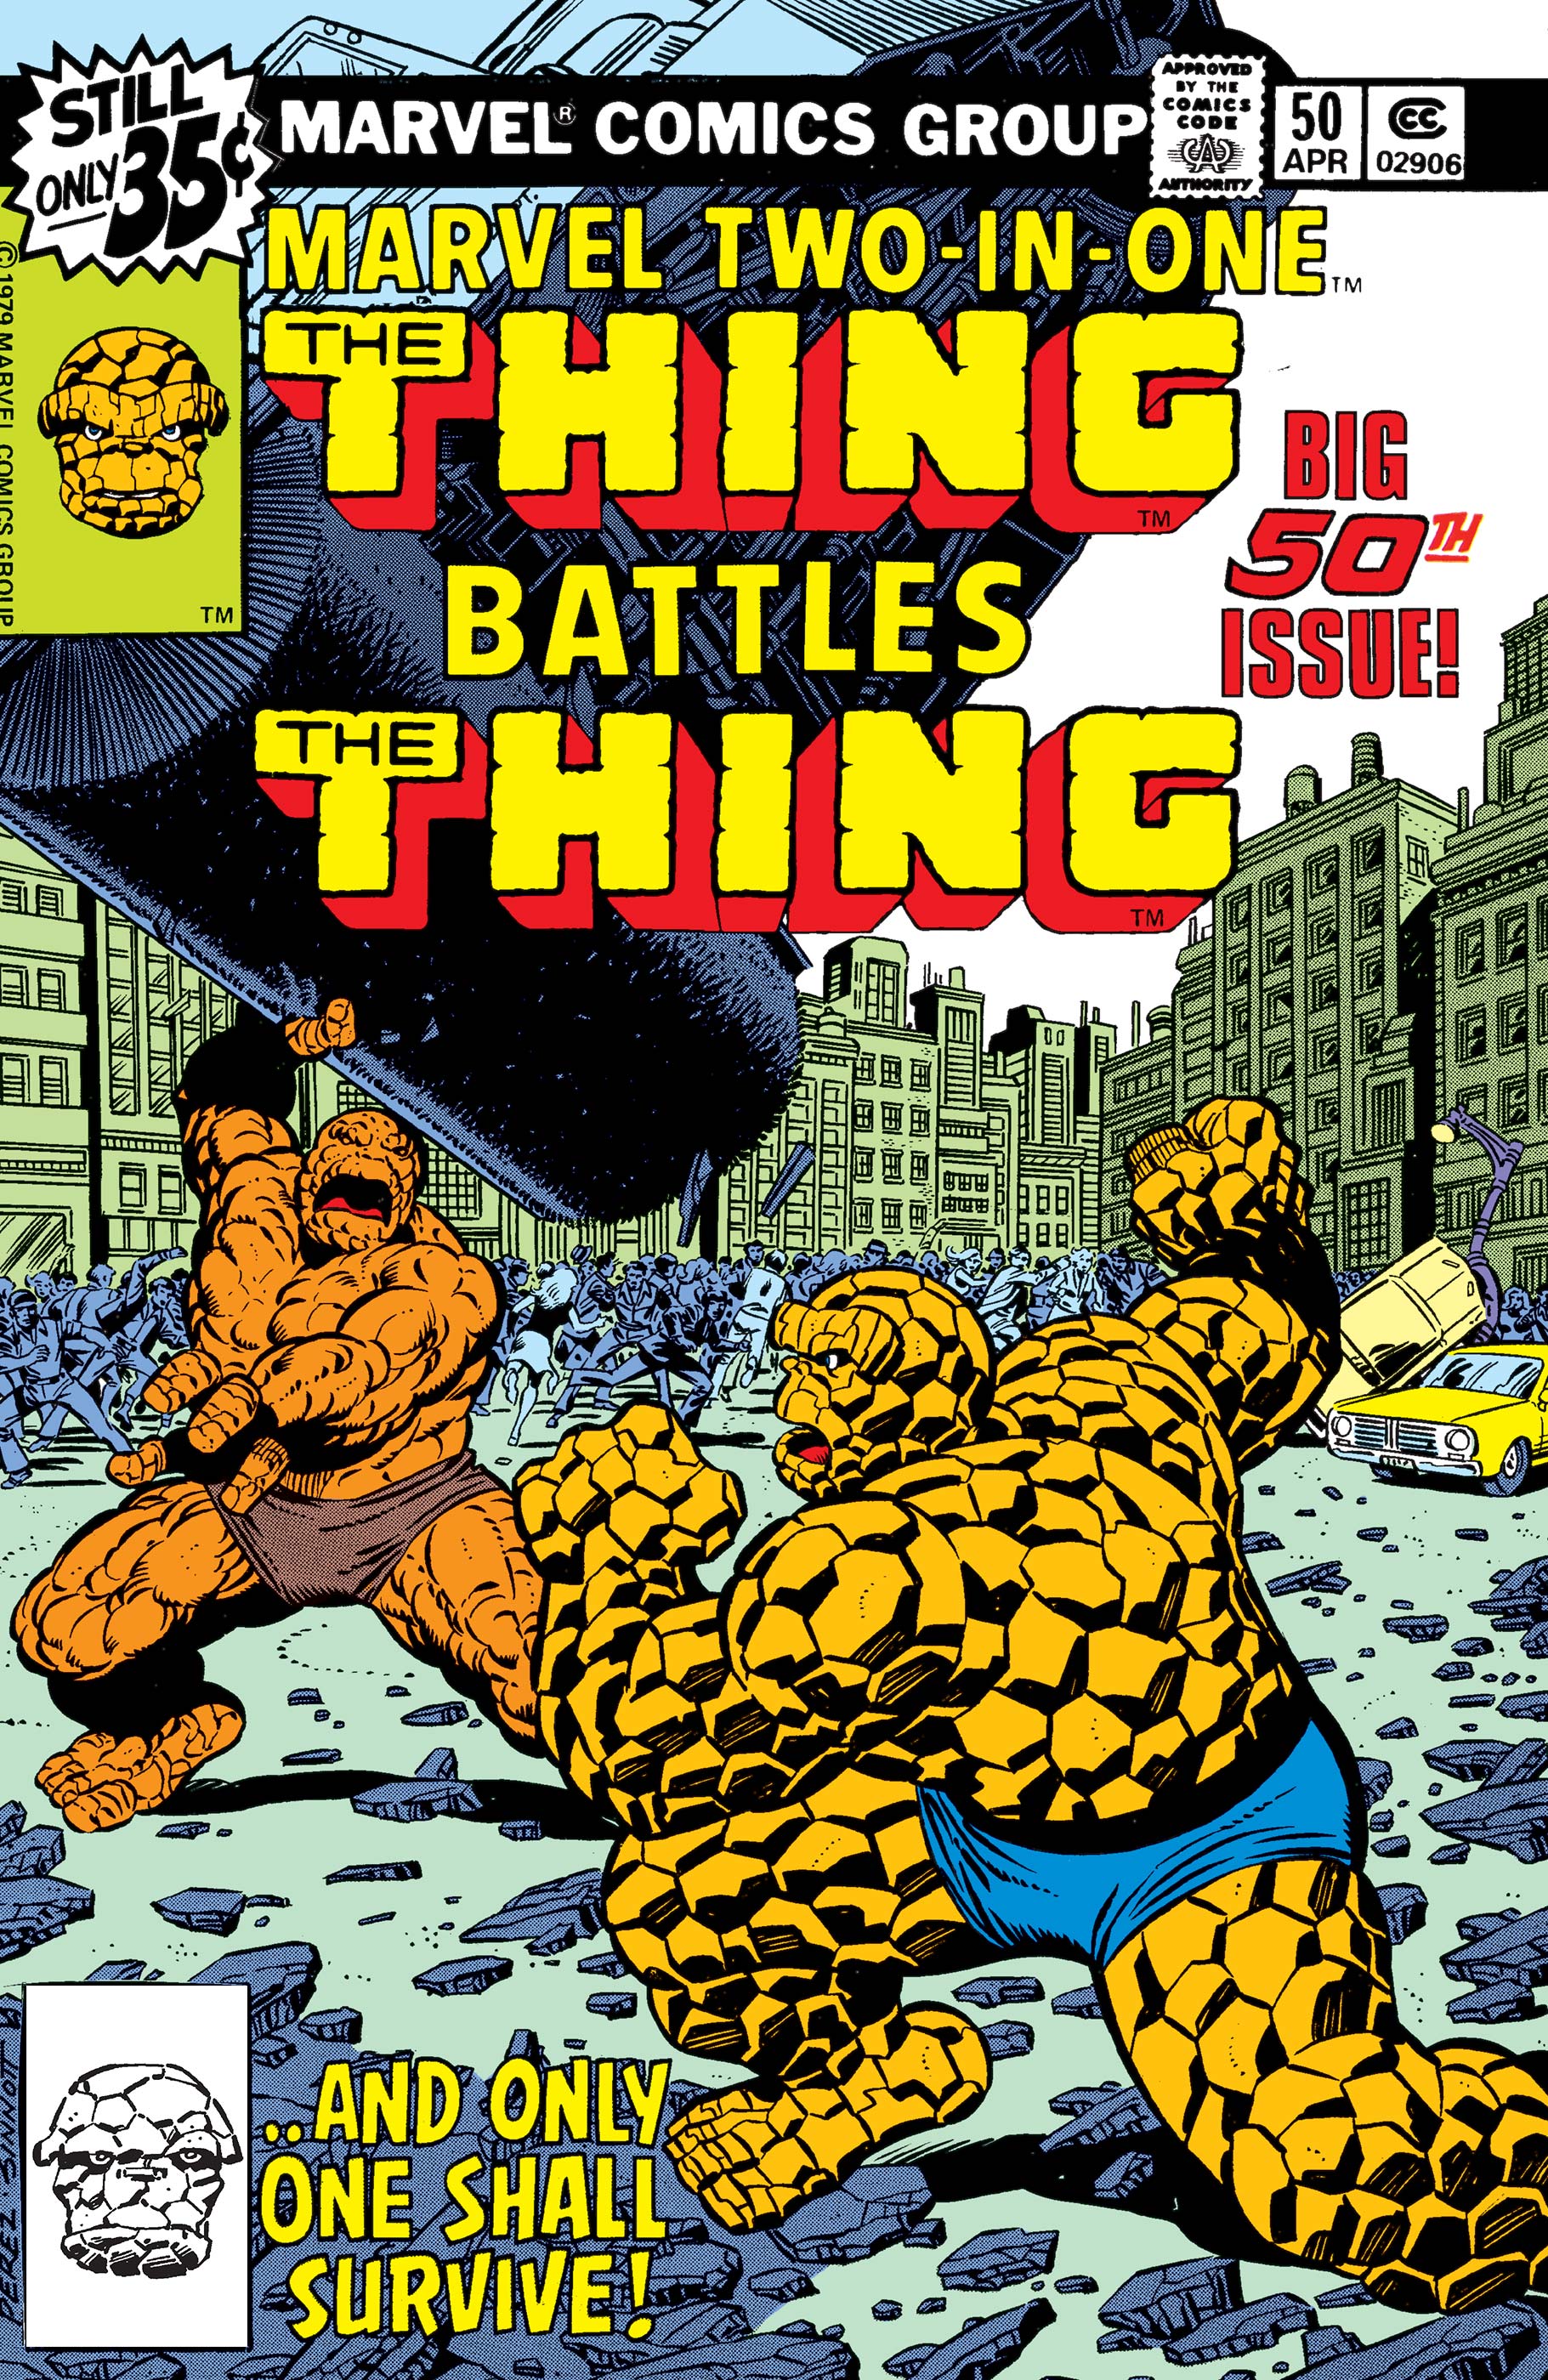 Marvel Two-in-One (1974) #50